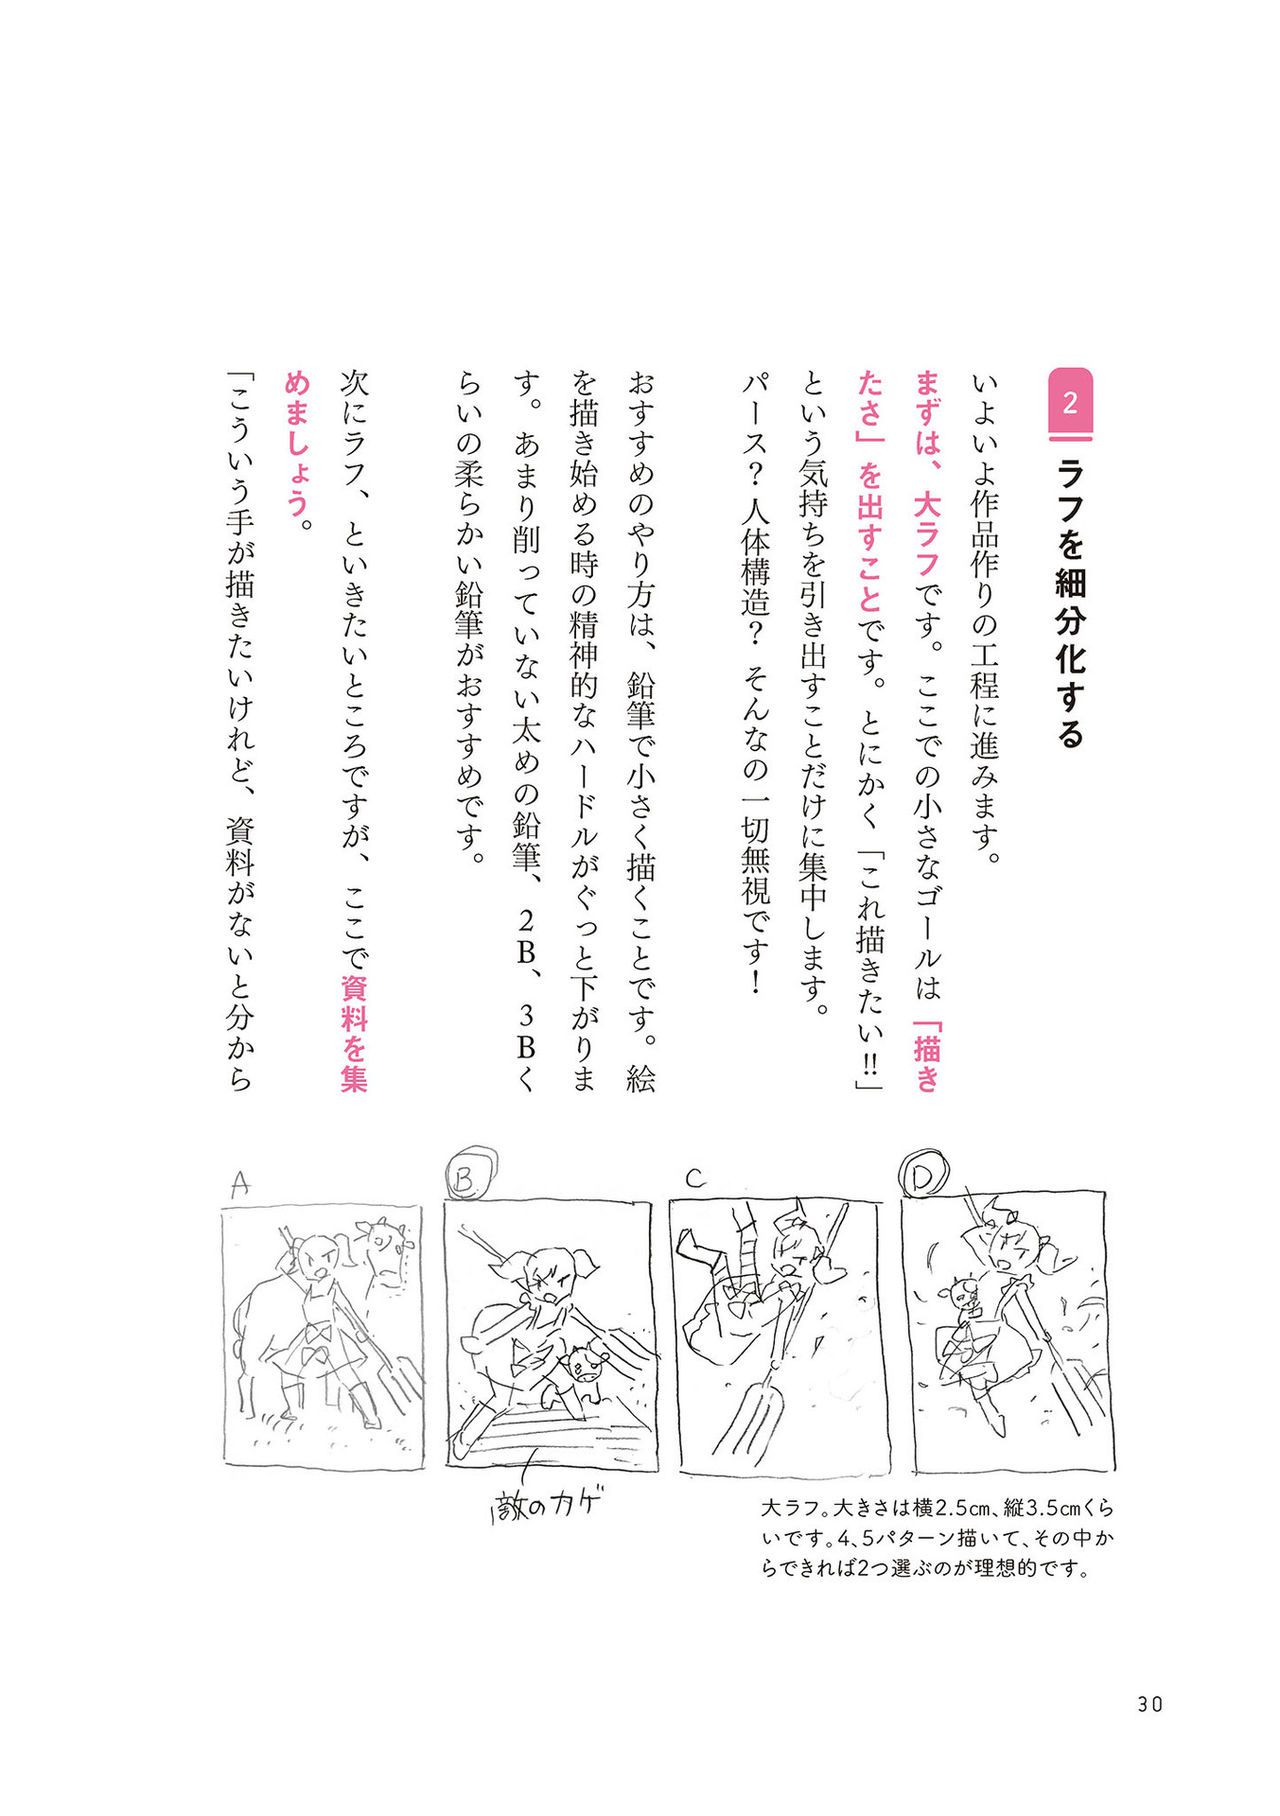 Prohibition of drawing well How to improve illustrations that are not smooth うまく描くの禁止 ツラくないイラスト上達法 31